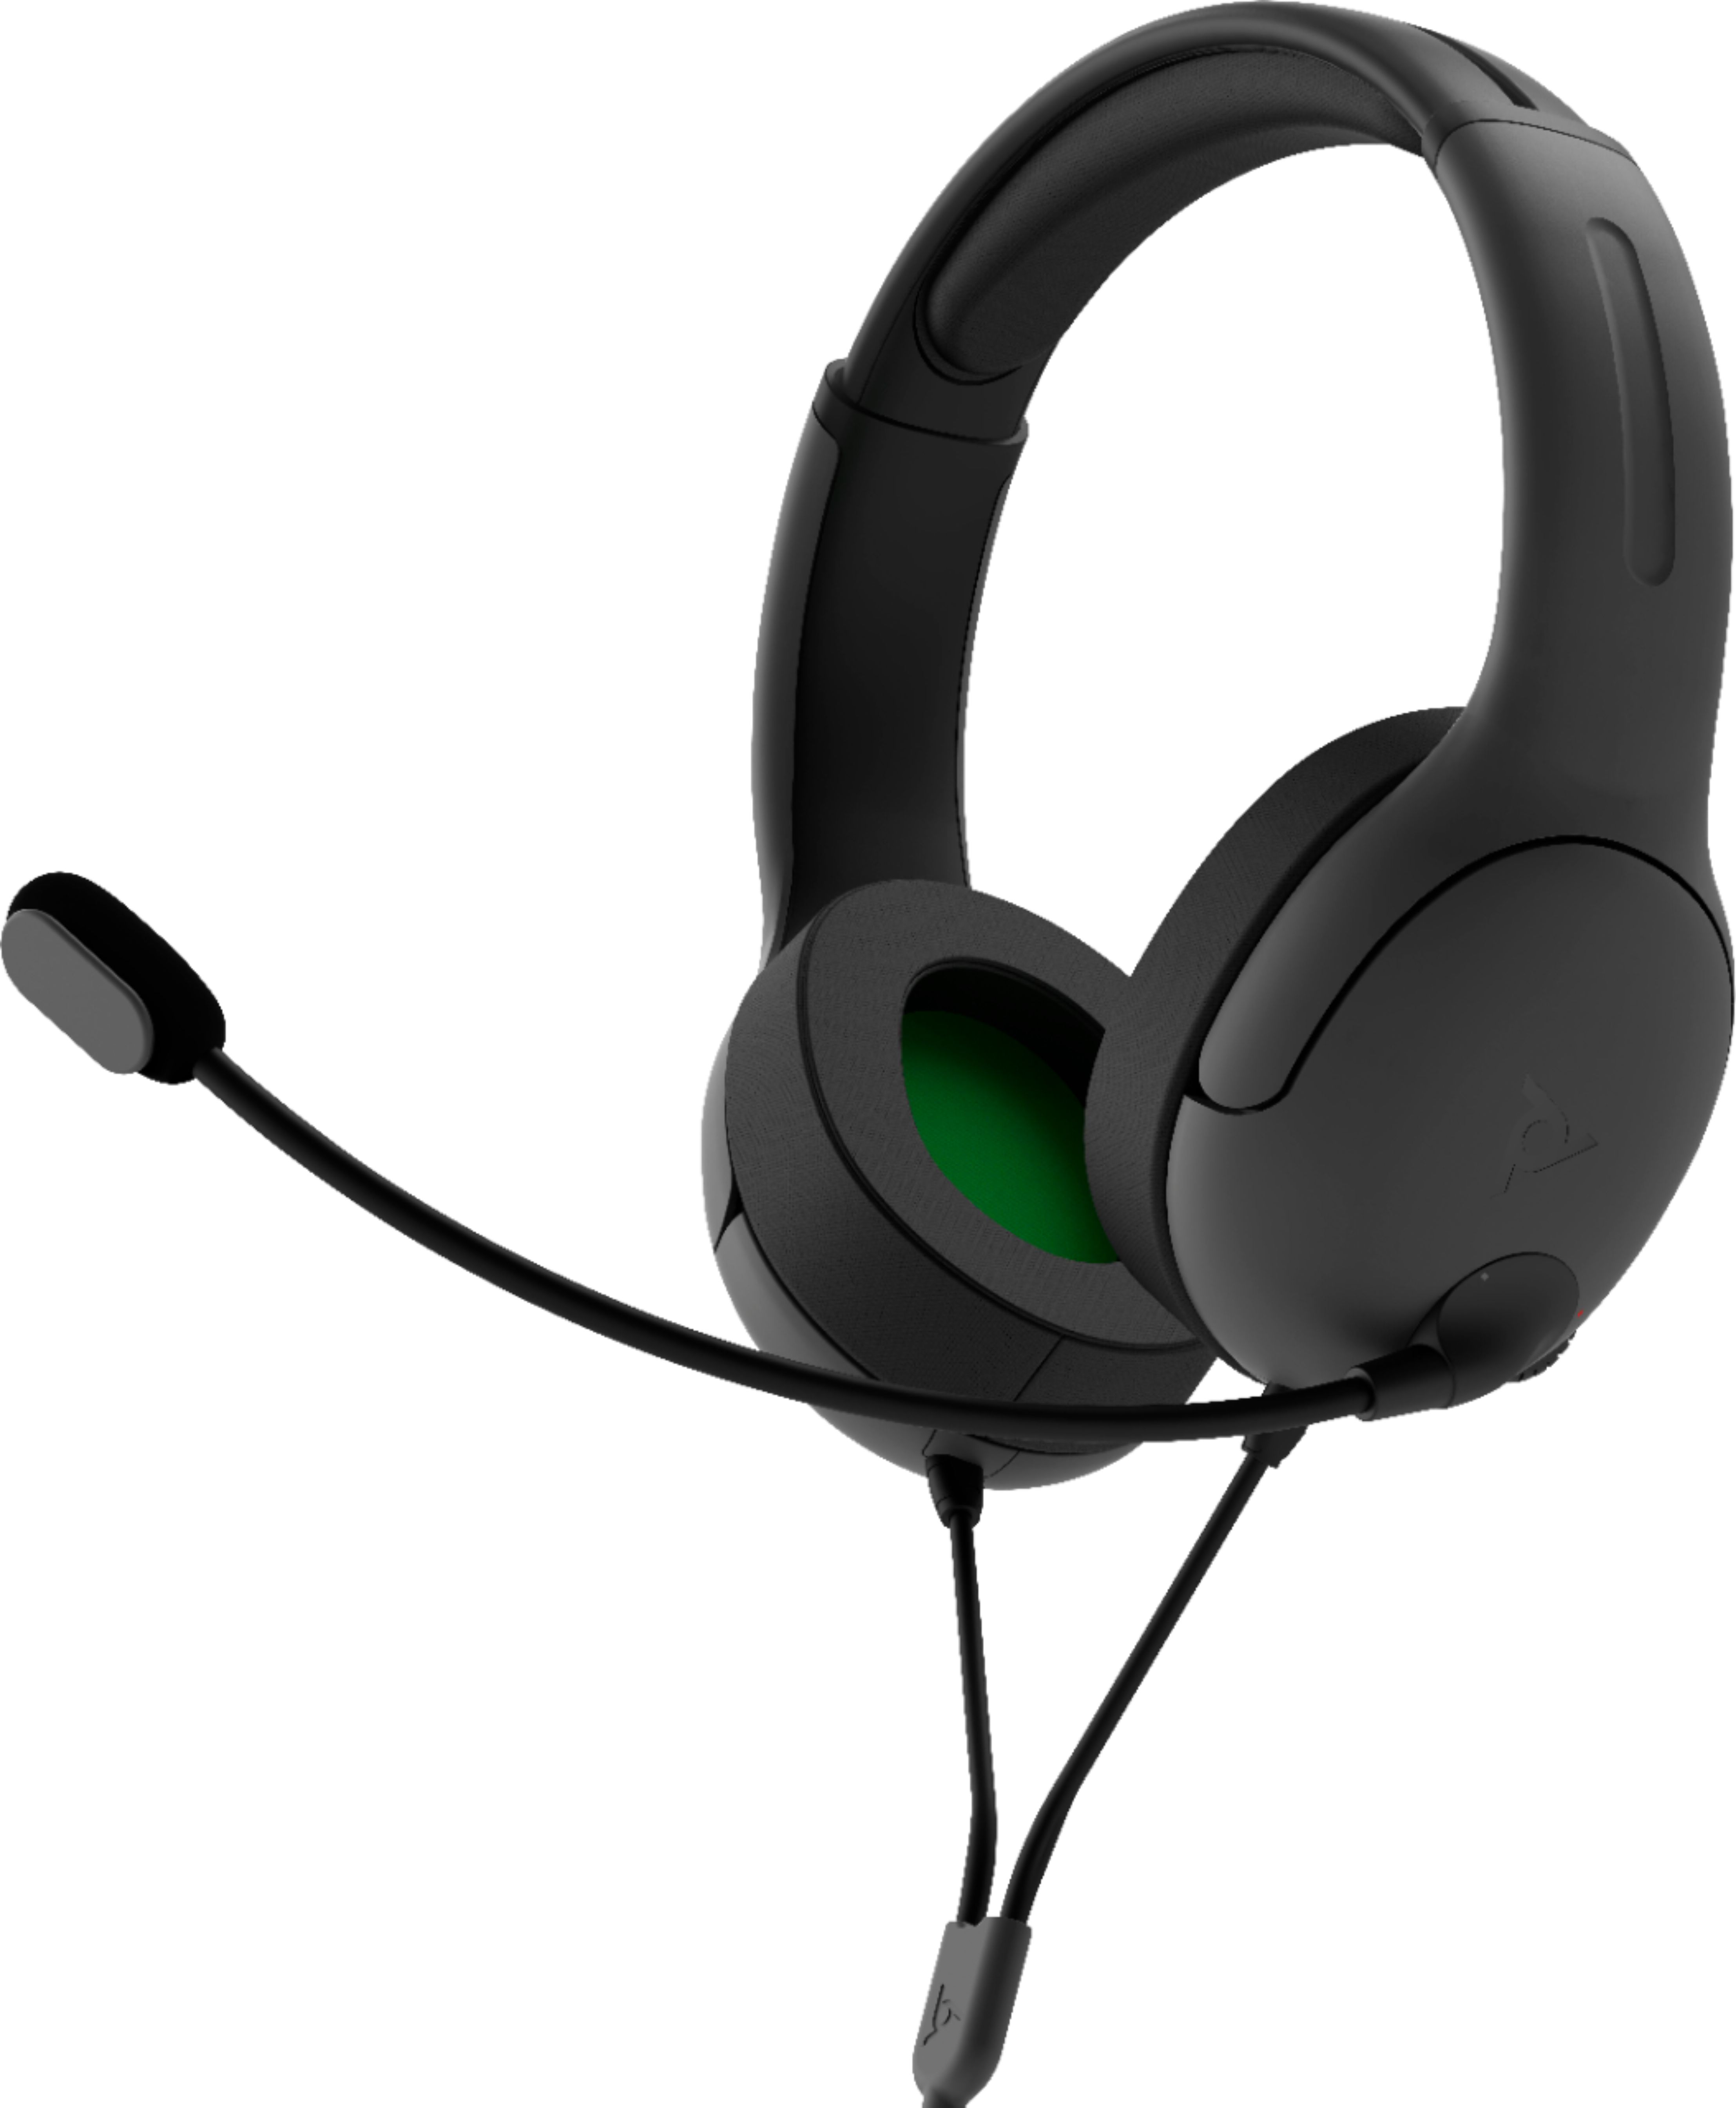 highest rated xbox one headset